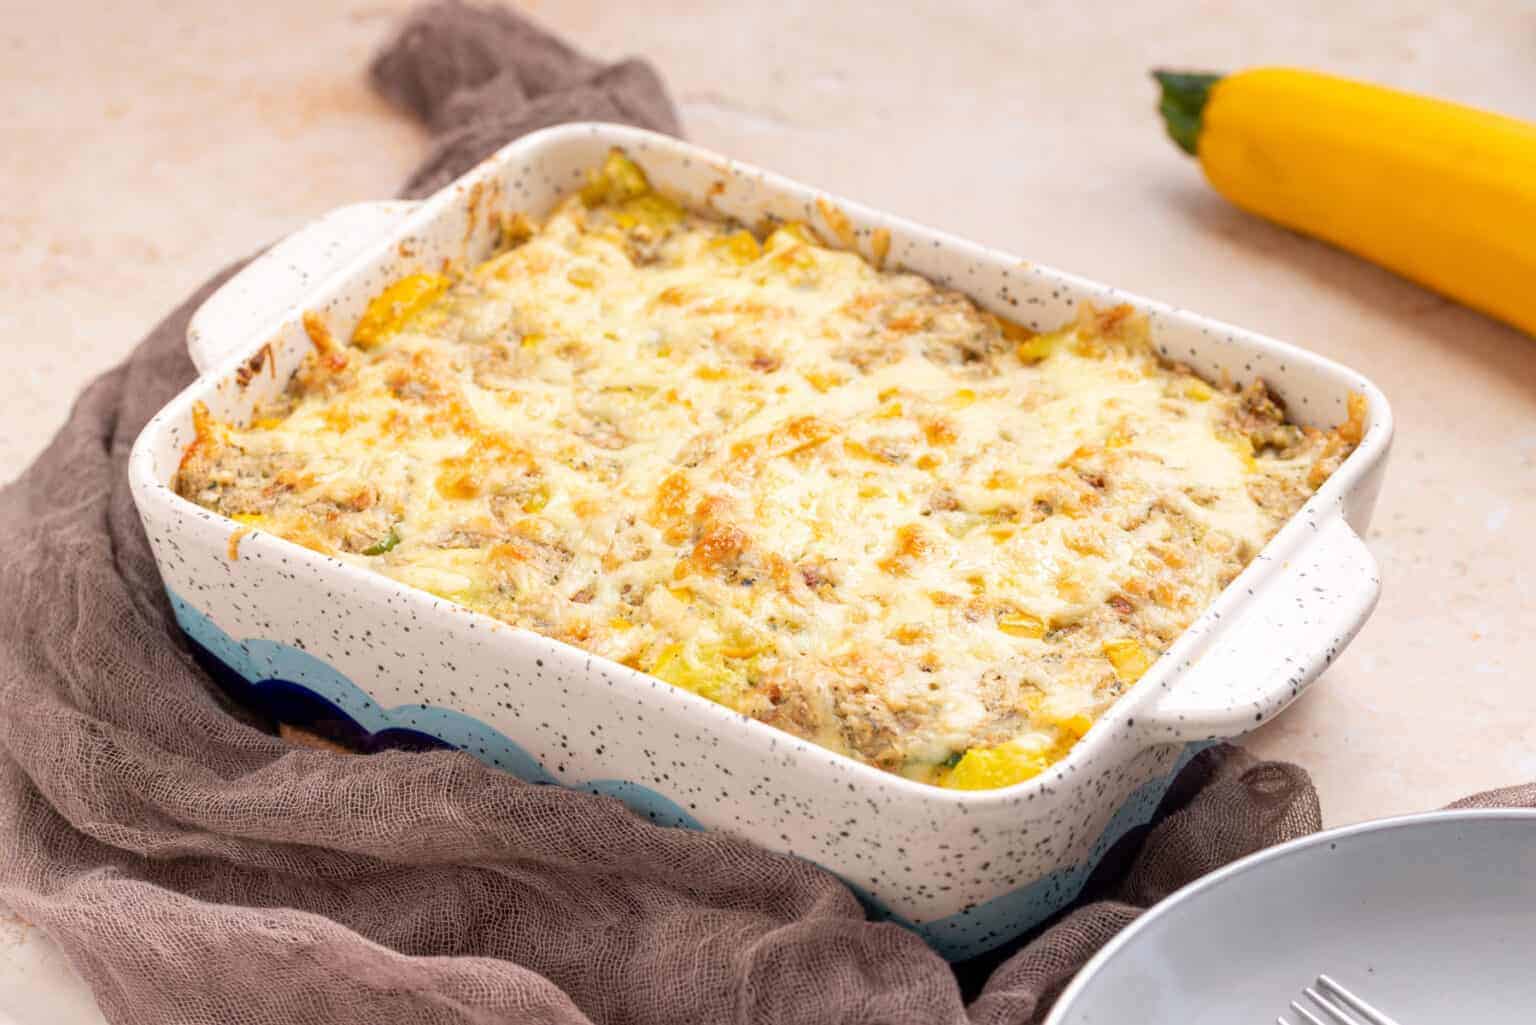 An image of Squash Casserole in a baking dish.